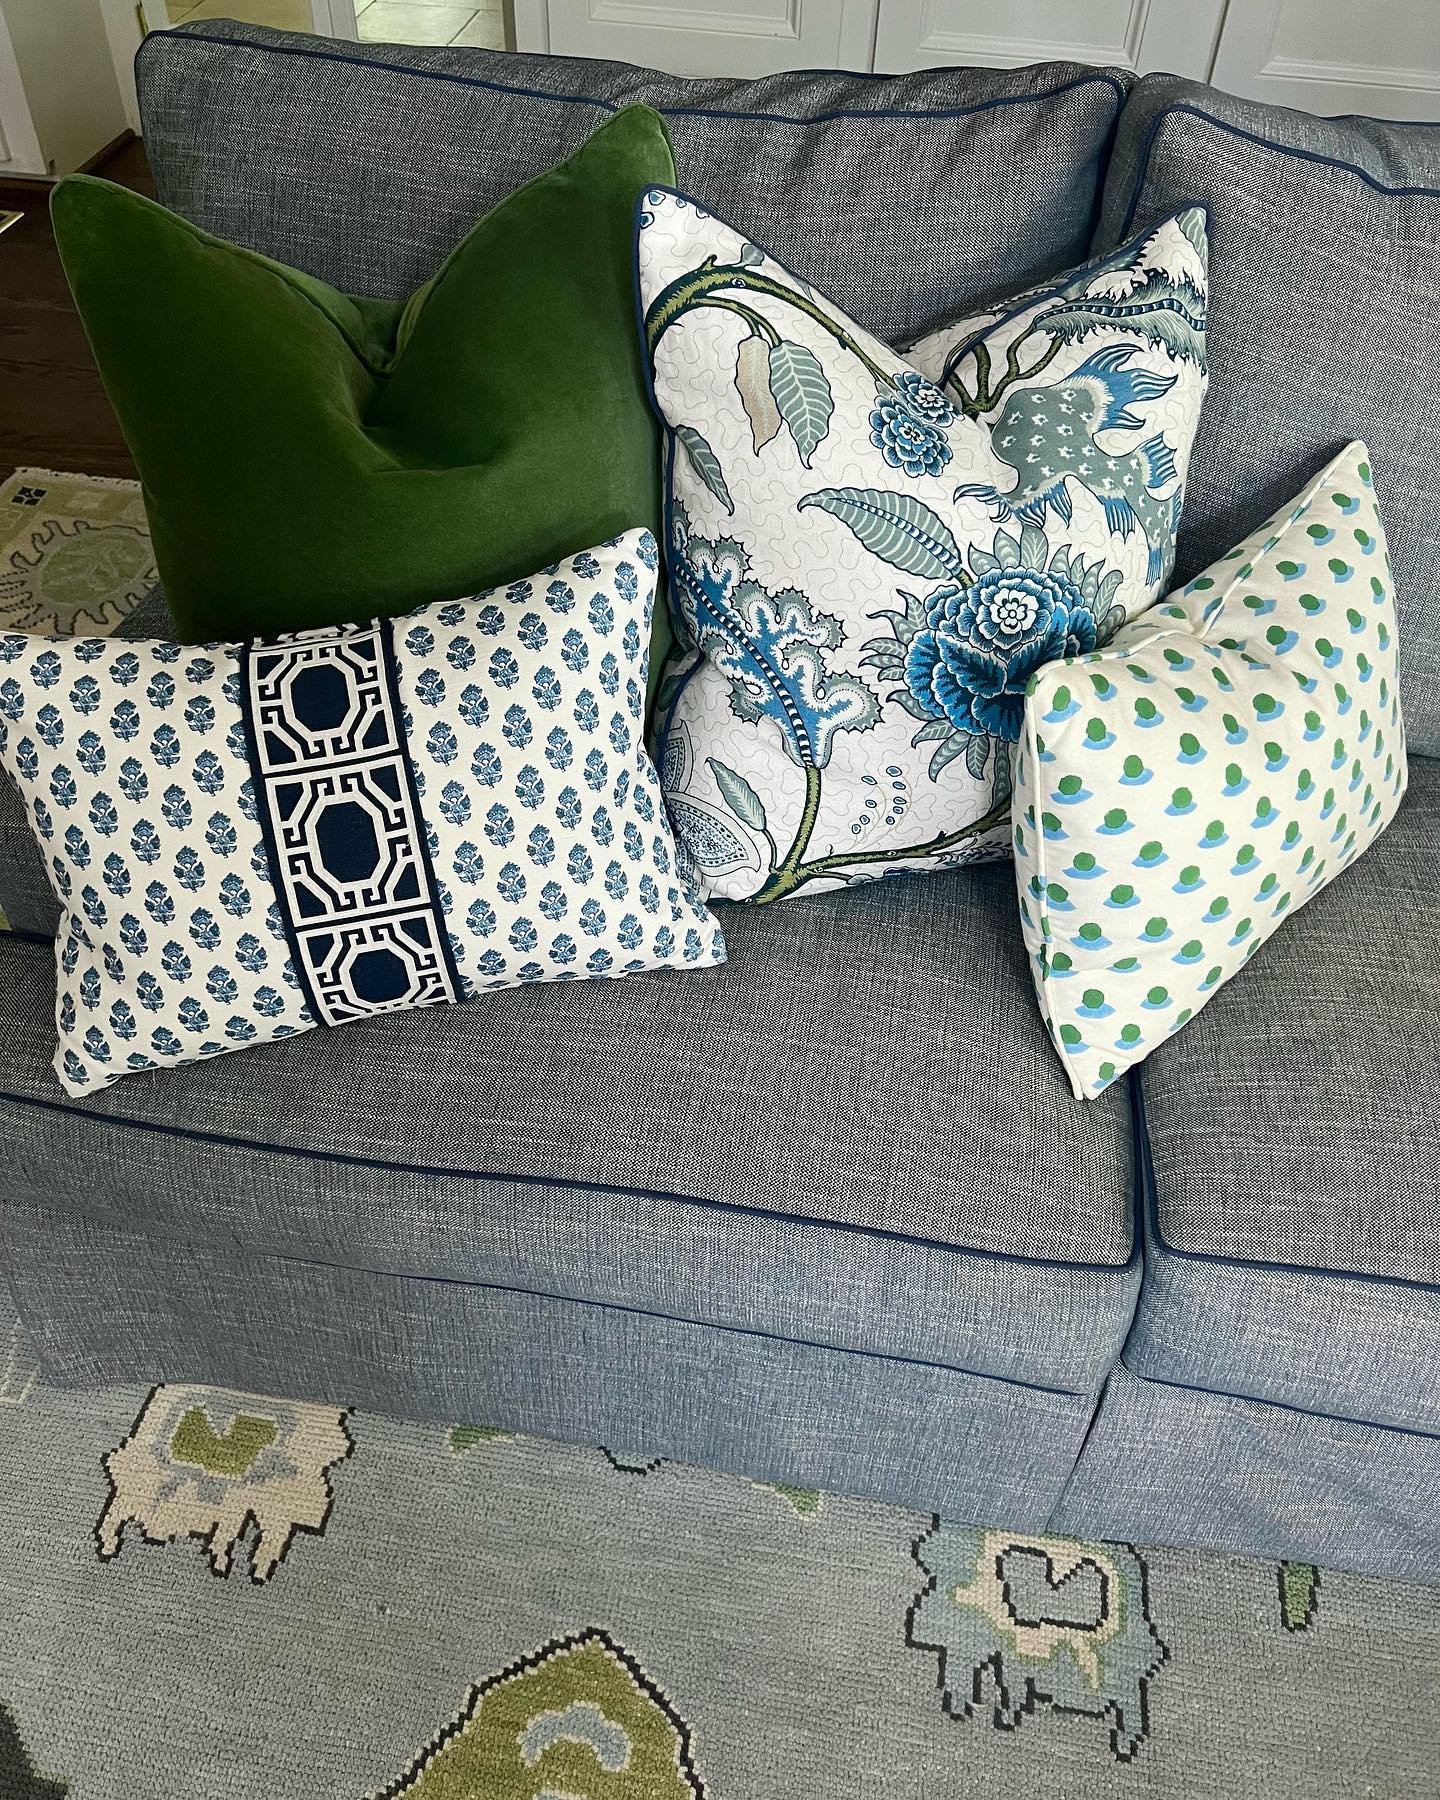 All things blue and green. Pillow shot from a recent install with one beautiful rug.💙💚

#lbwstudio #pillowtalk #pillowdesign #blueandgreen #interiors